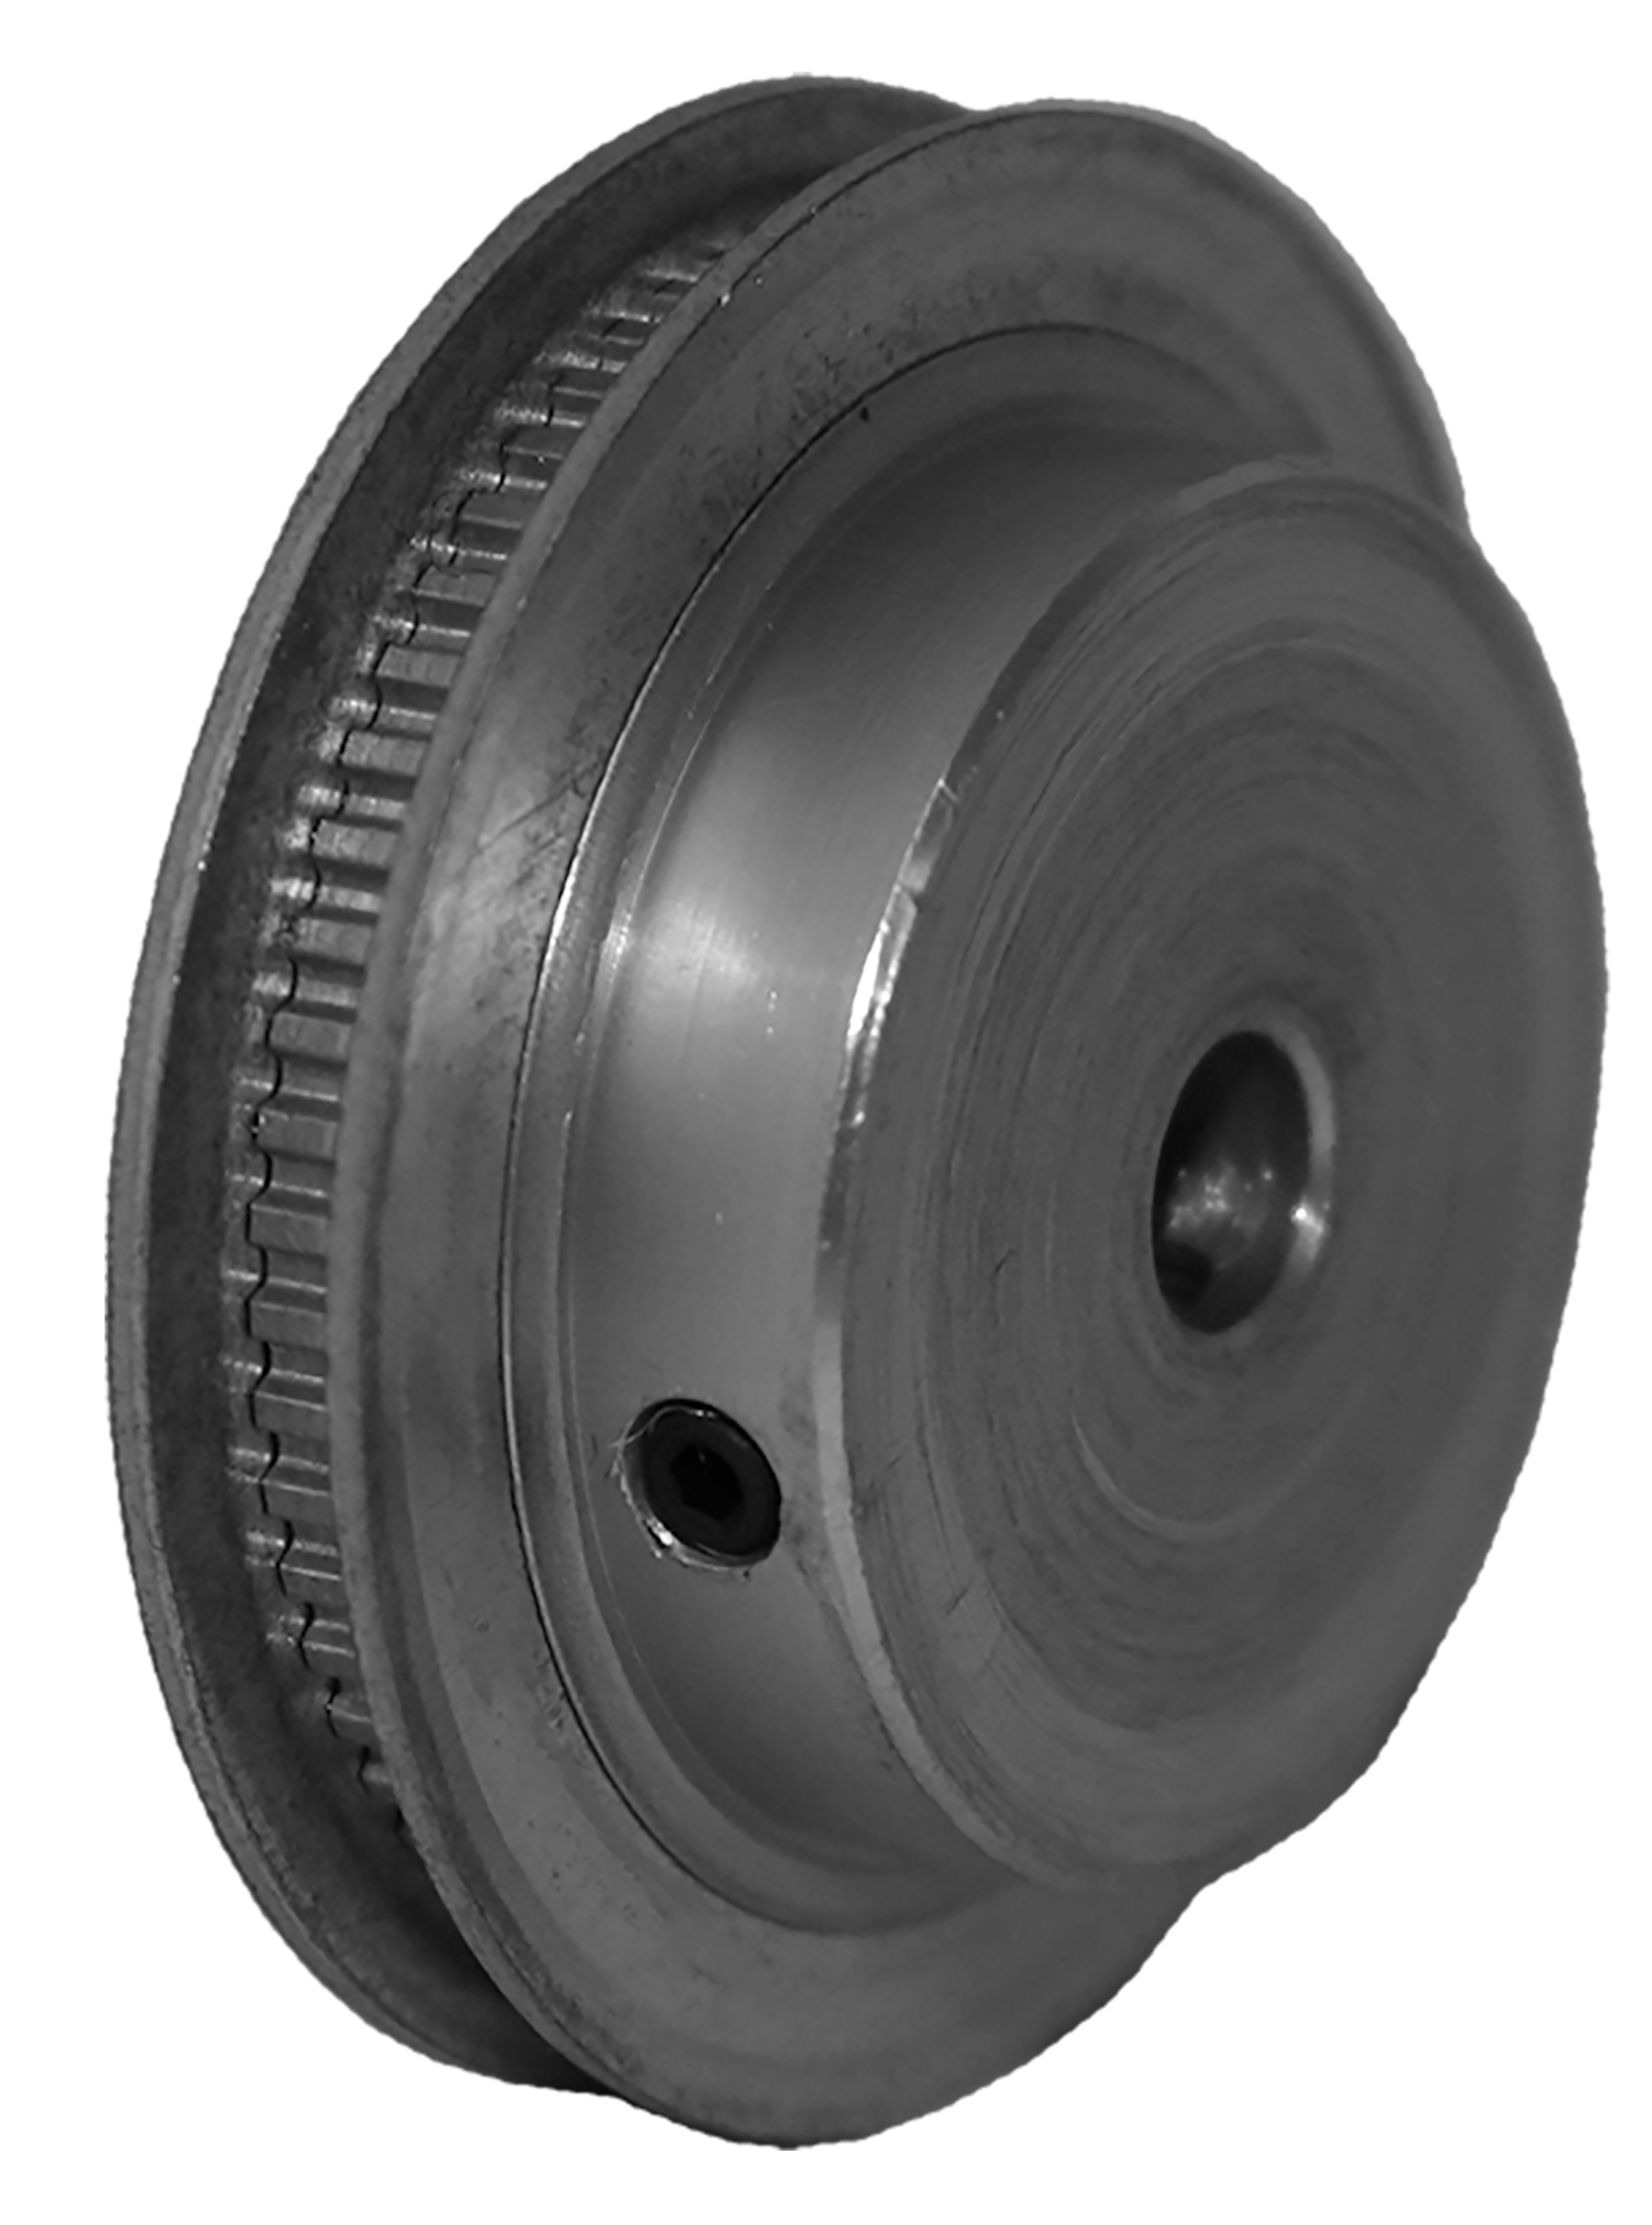 60MP012-6FA3 - Aluminum Imperial Pitch Pulleys